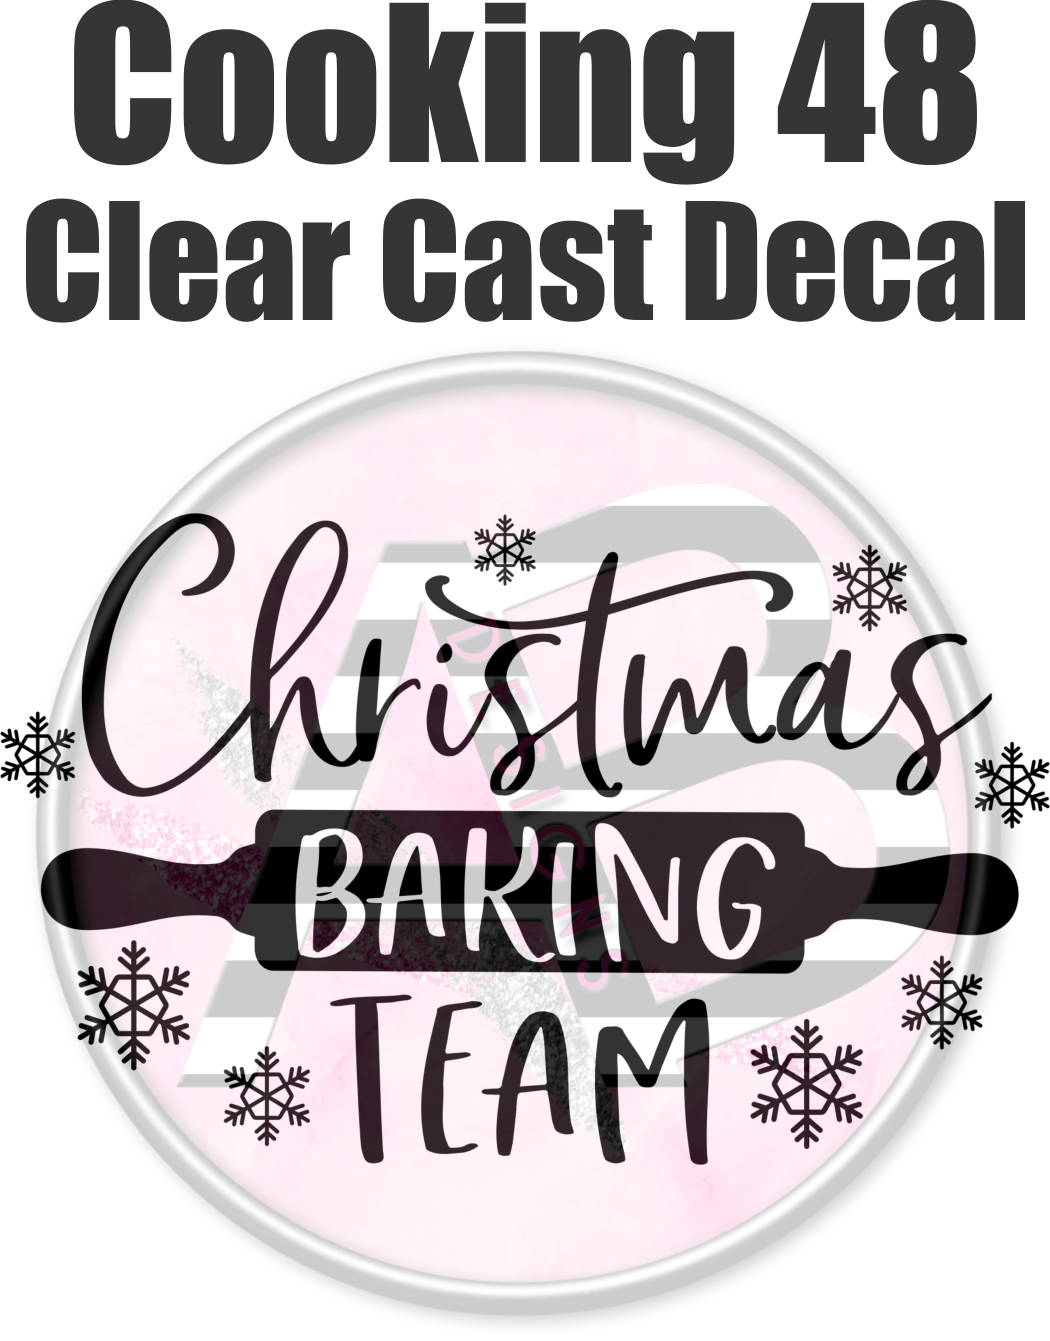 Cooking 48 - Clear Cast Decal - 196